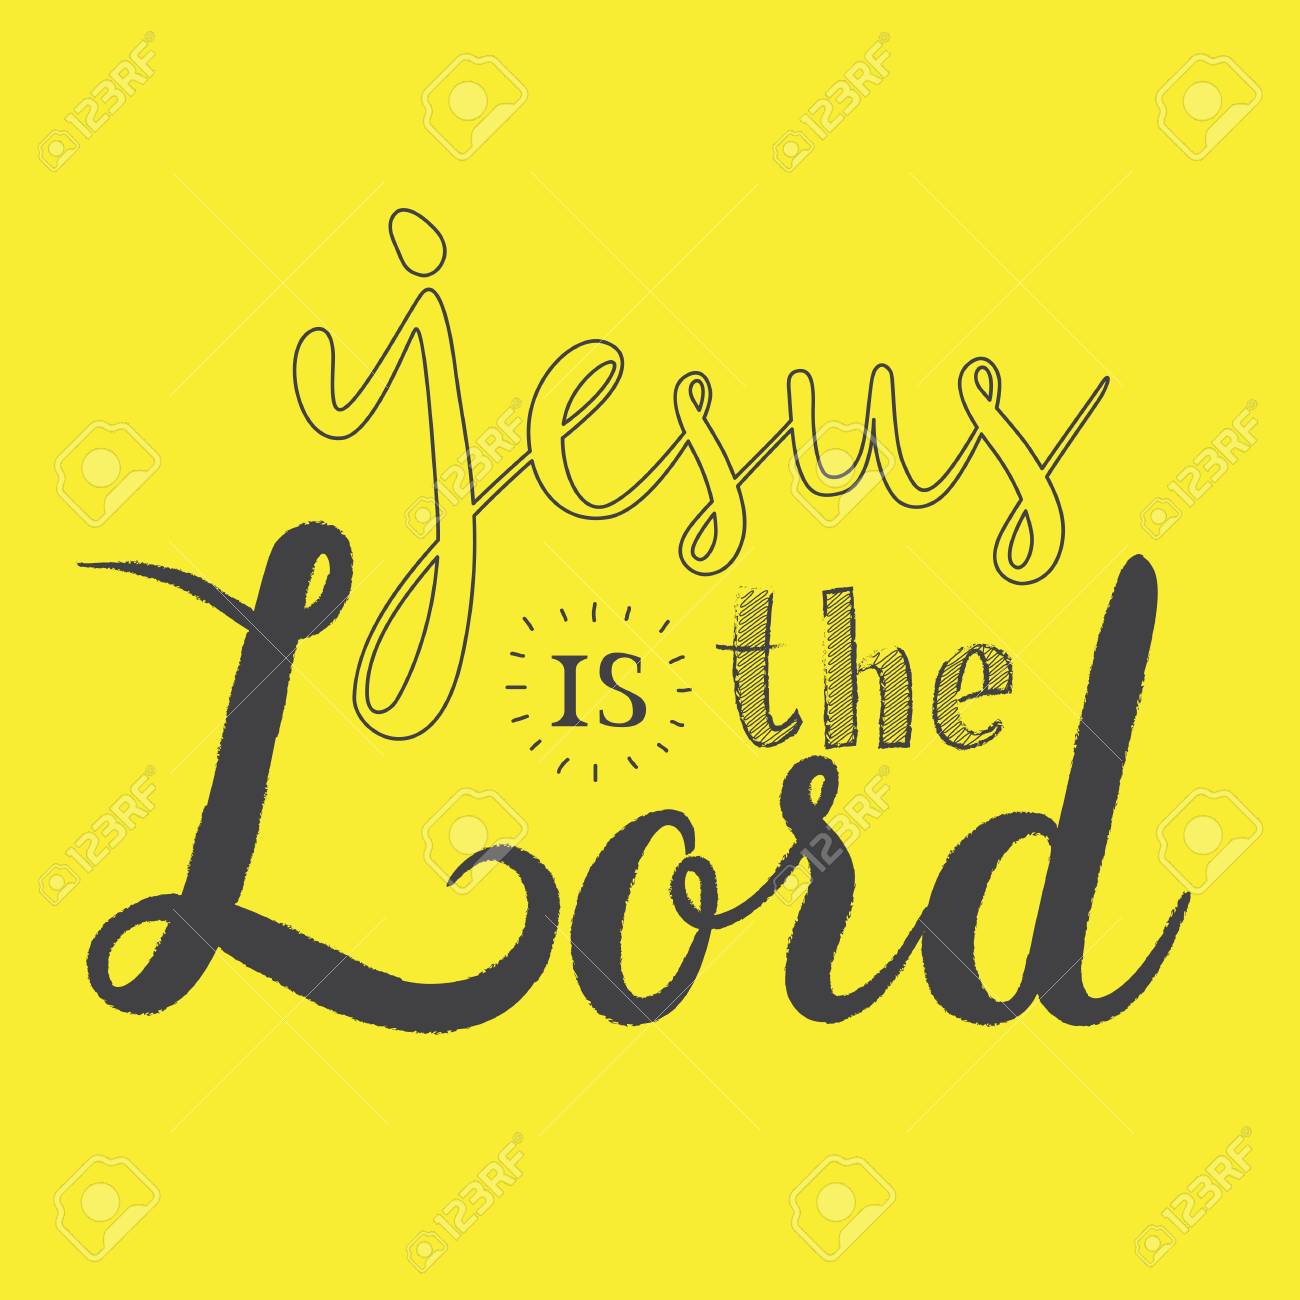 Jesus Is The Lord Calligraphy On Isolated Yellow Background